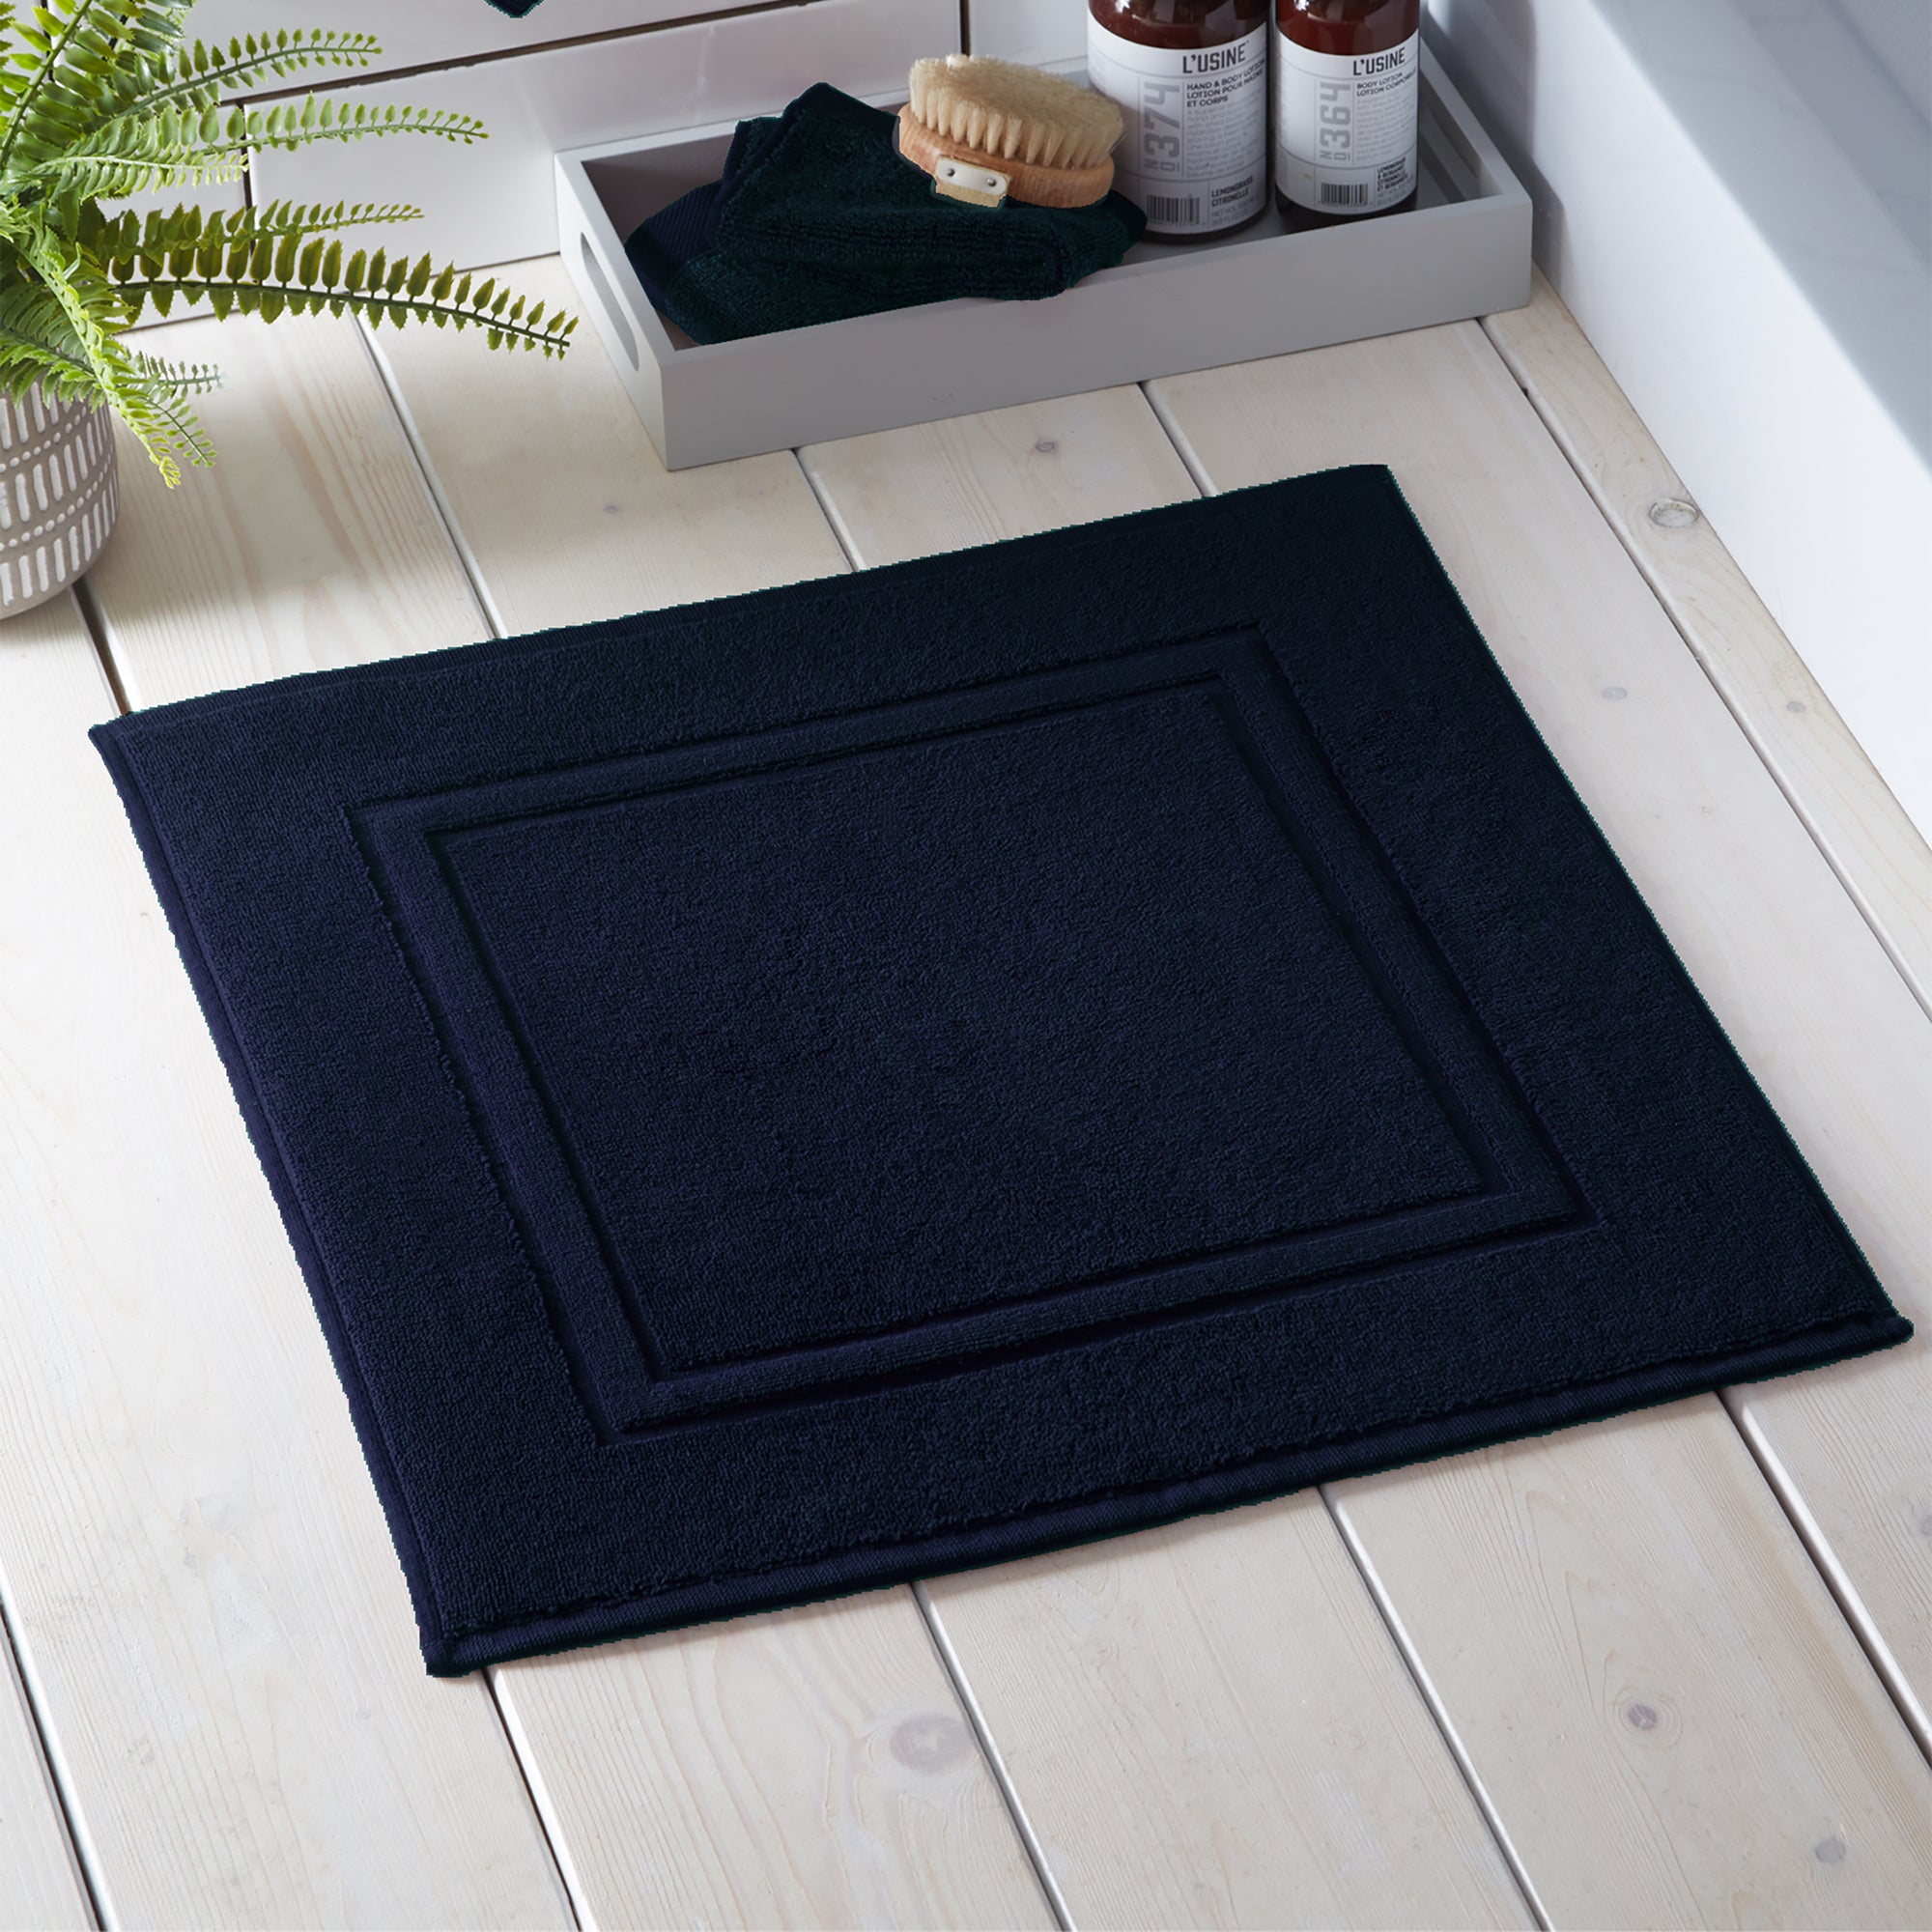 Shower Mat Abode Eco by Drift Home in Navy